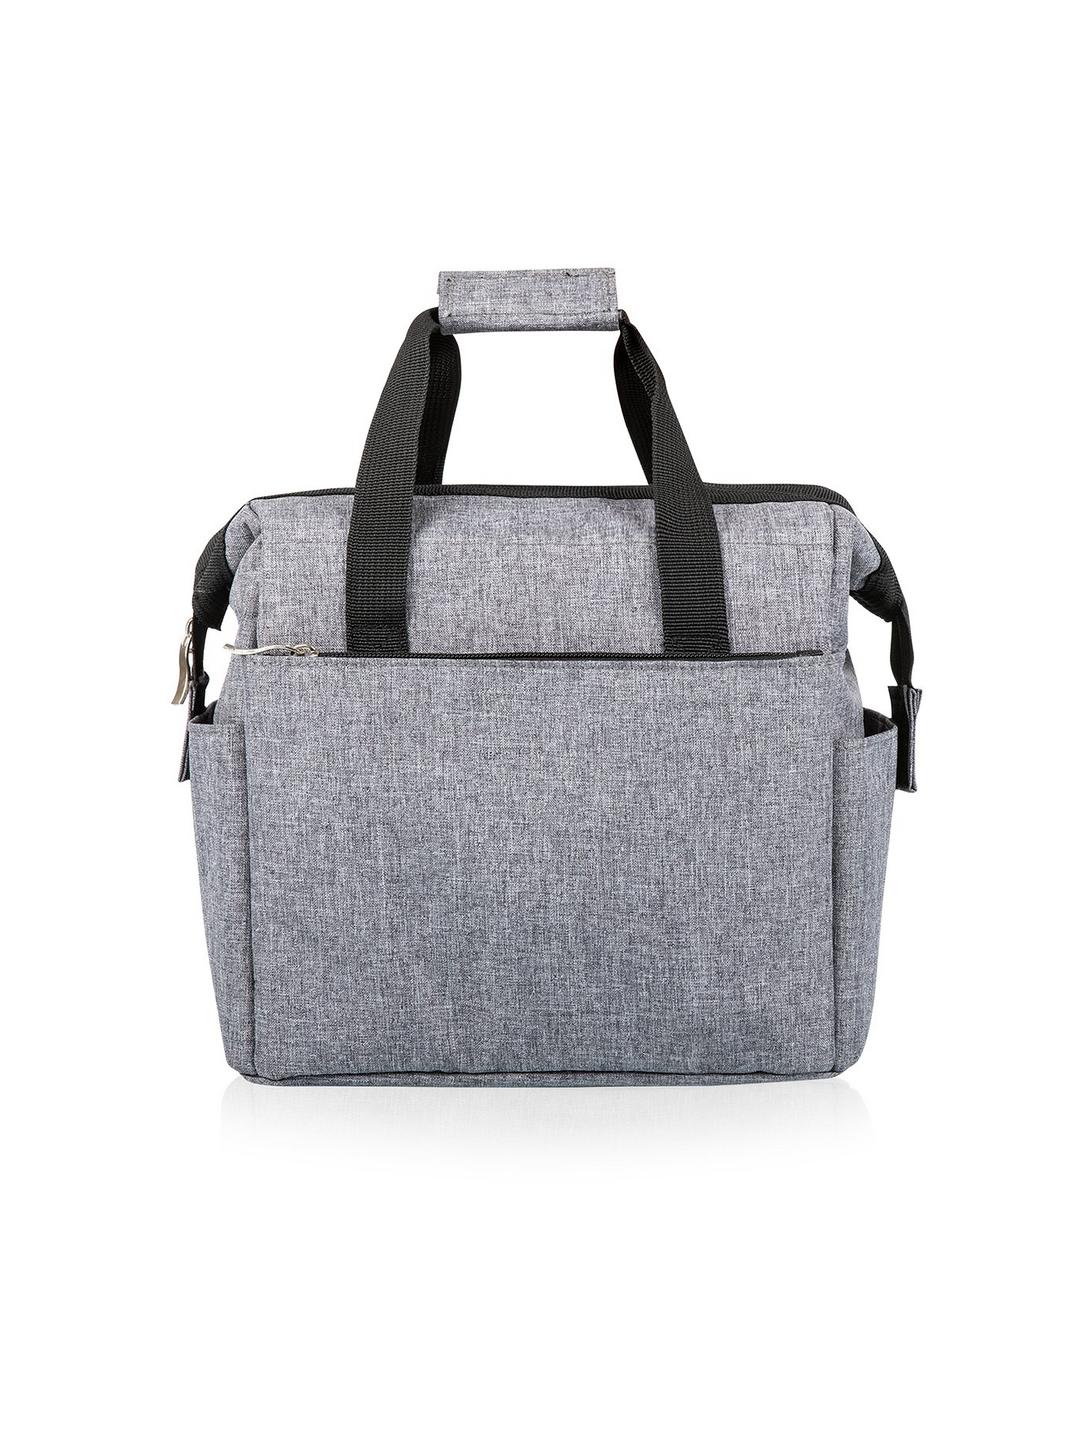 On The Go Heathered Gray Lunch Cooler, , hi-res